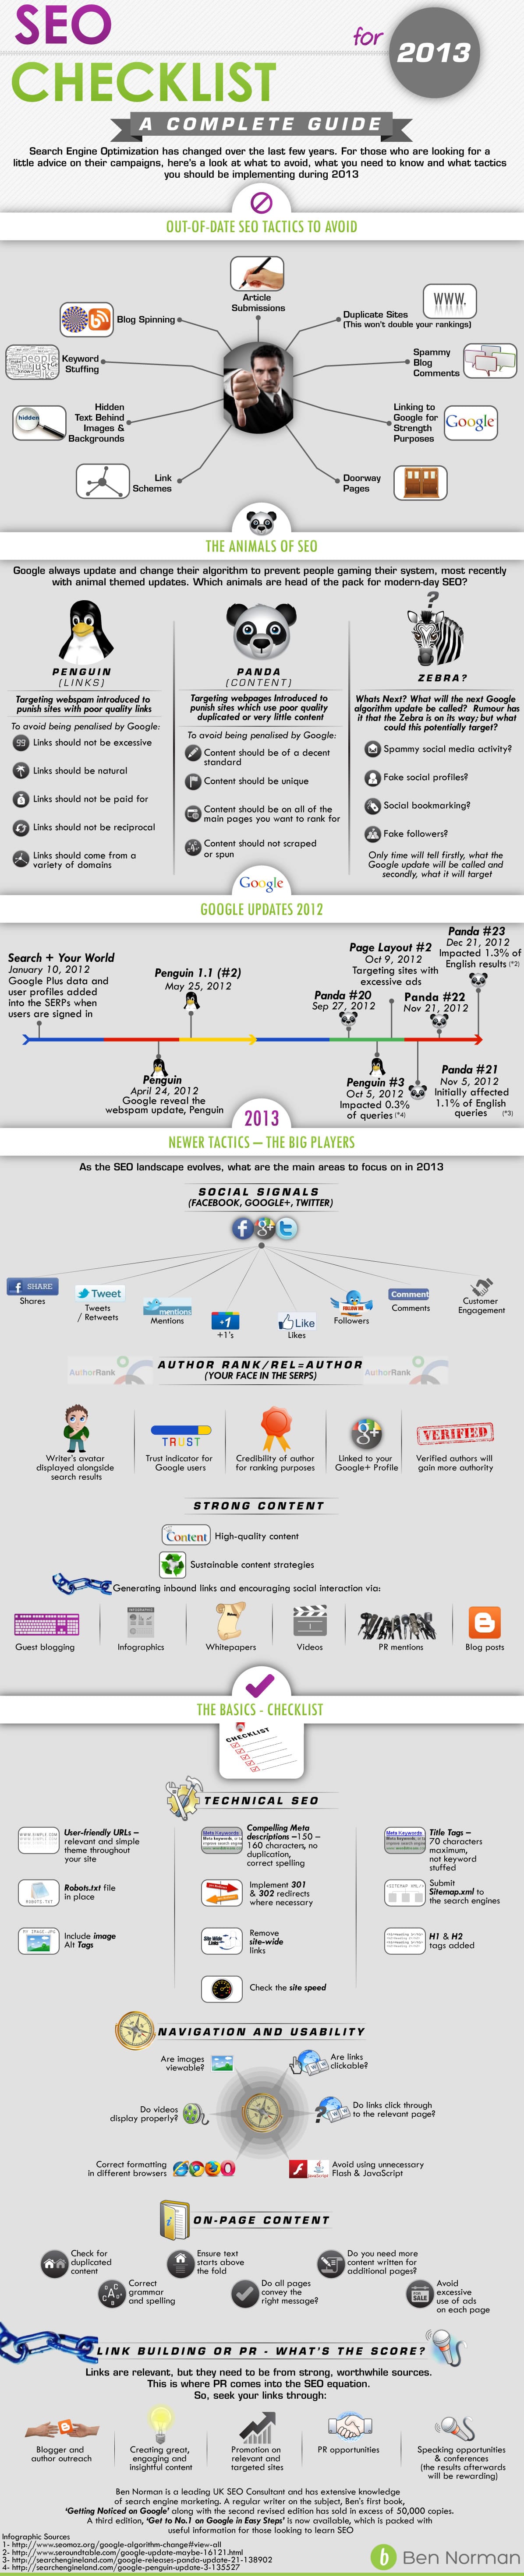 Ultimate SEO Checklist & Guide For 2013 [Infographic]